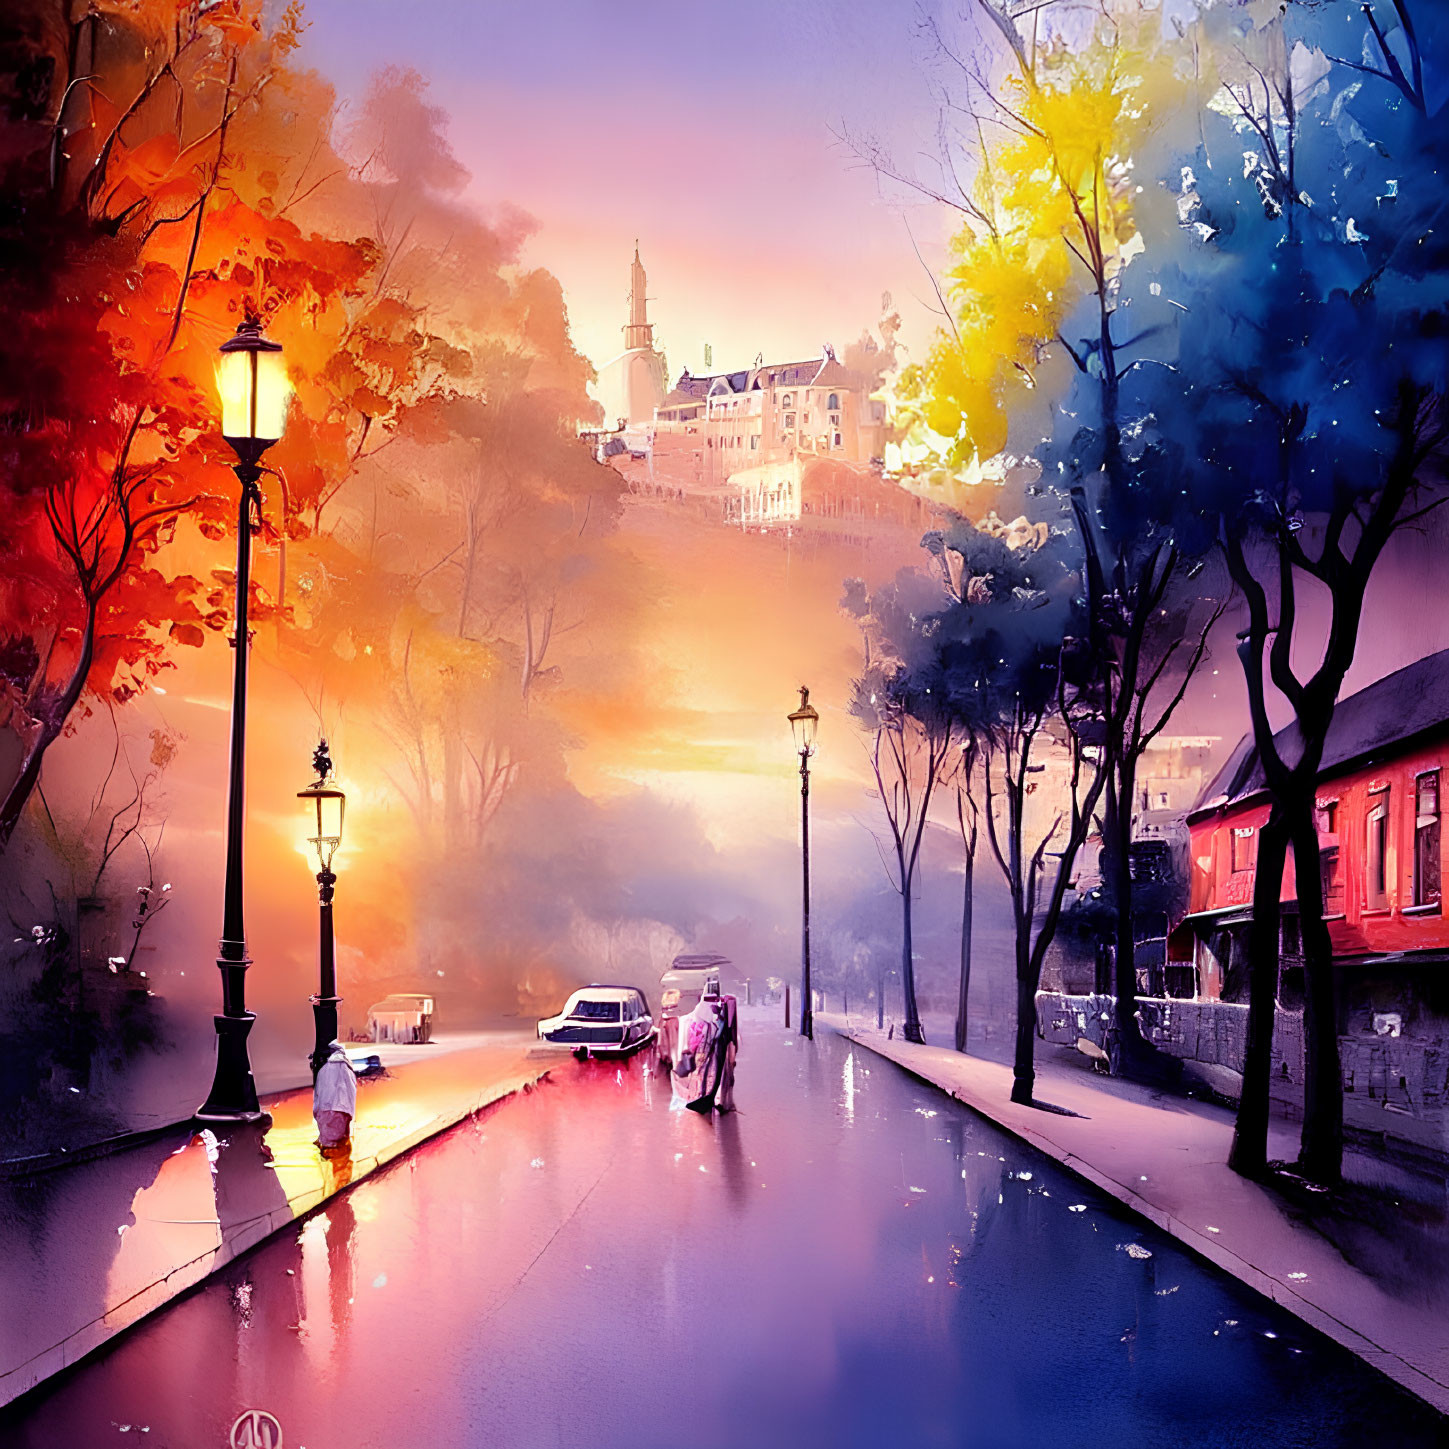 Colorful sunset street scene with silhouettes, vintage car, street lamps, wet pavement, distant